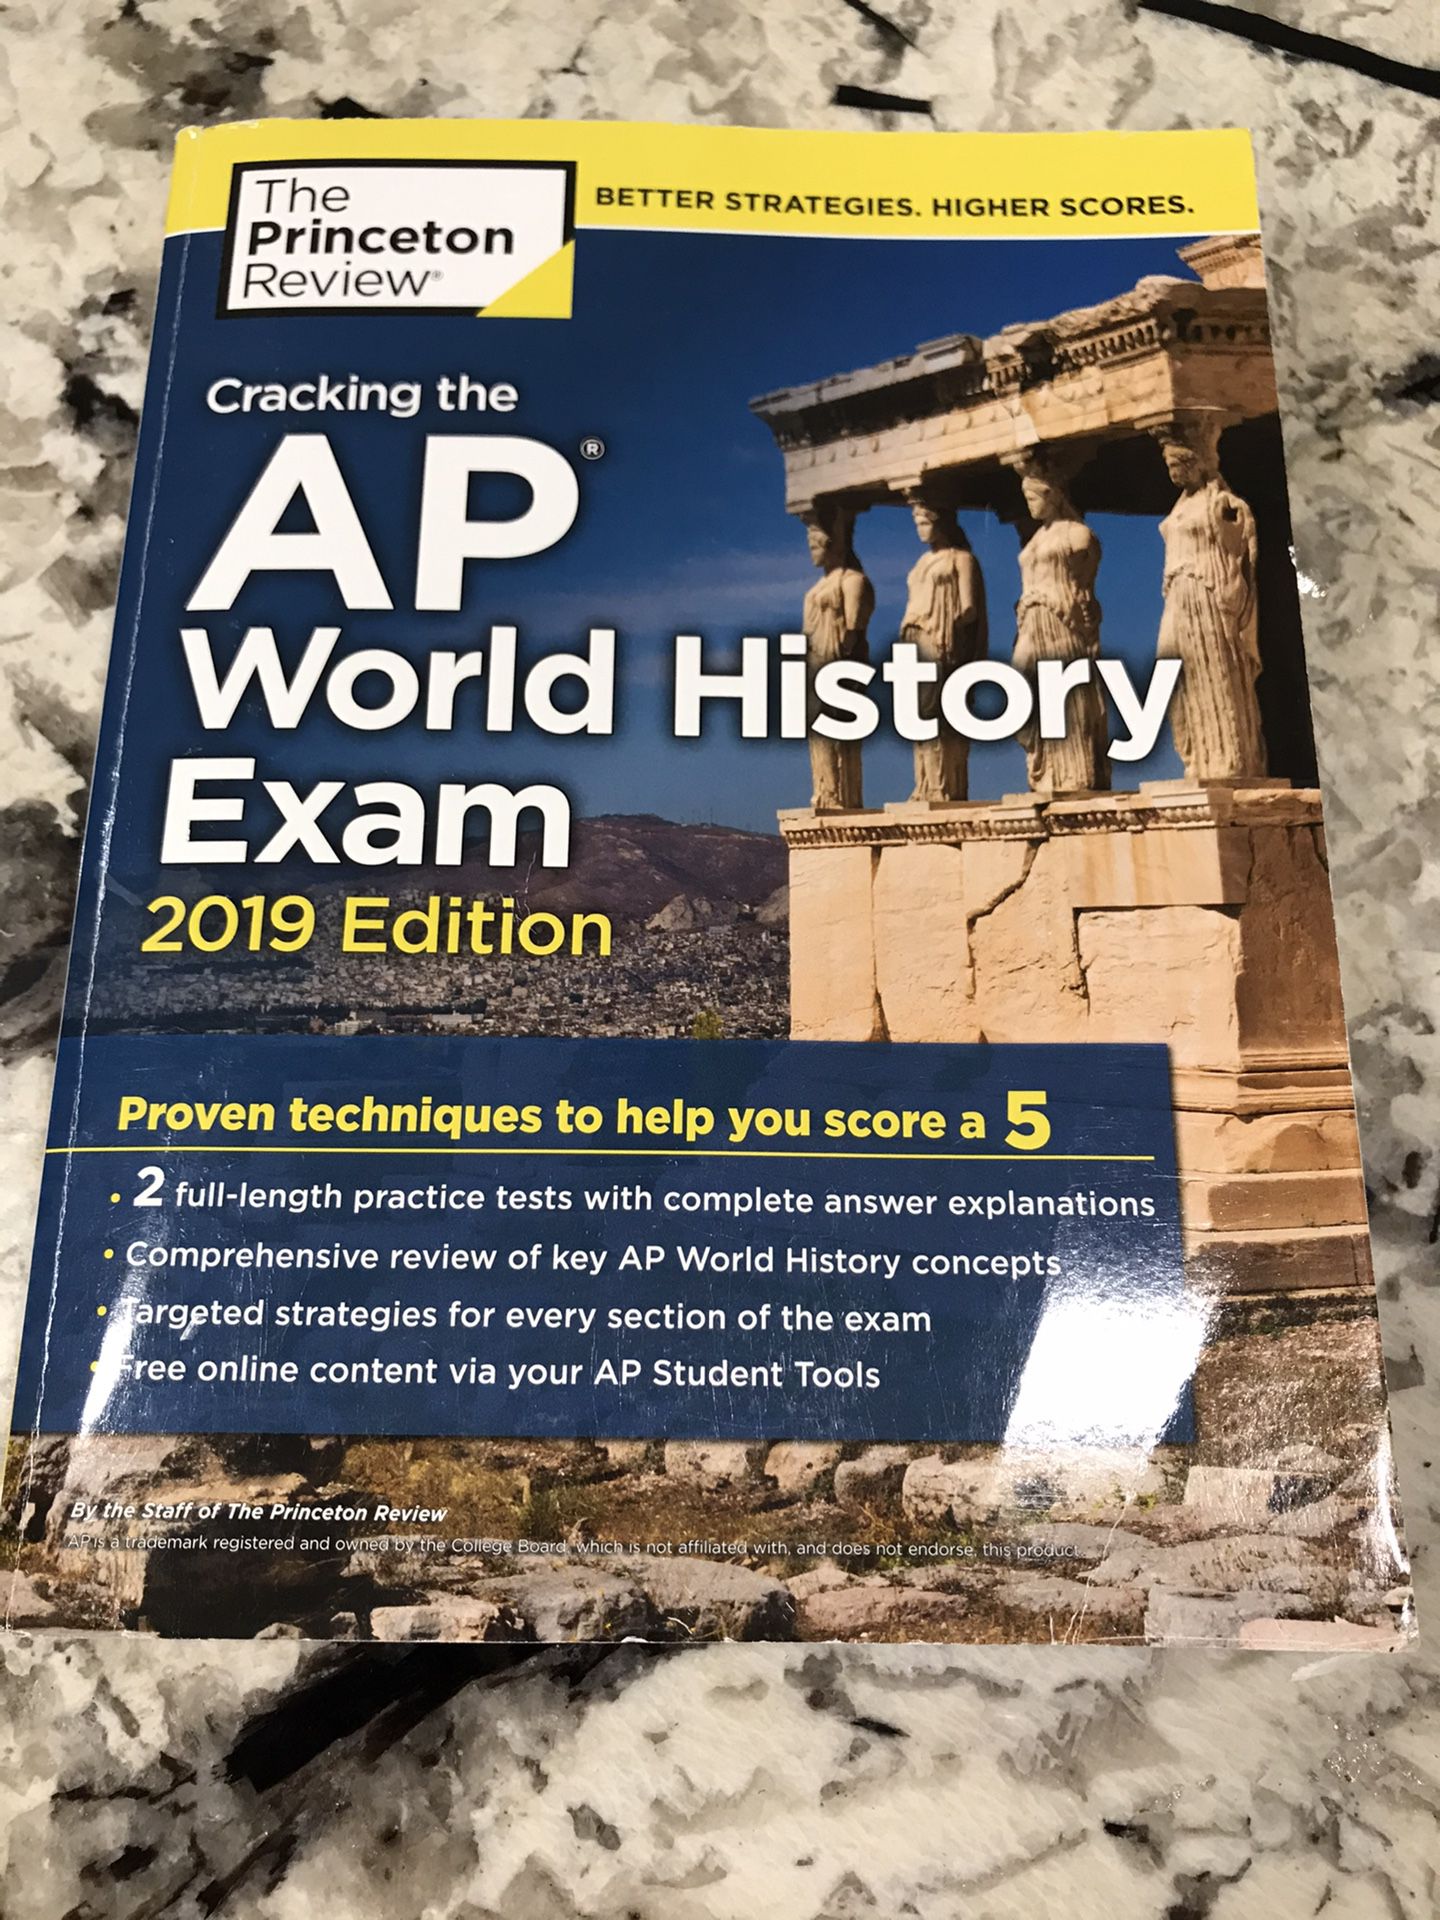 Cracking the AP World History Exam, 2019 Edition: Practice Tests & Proven